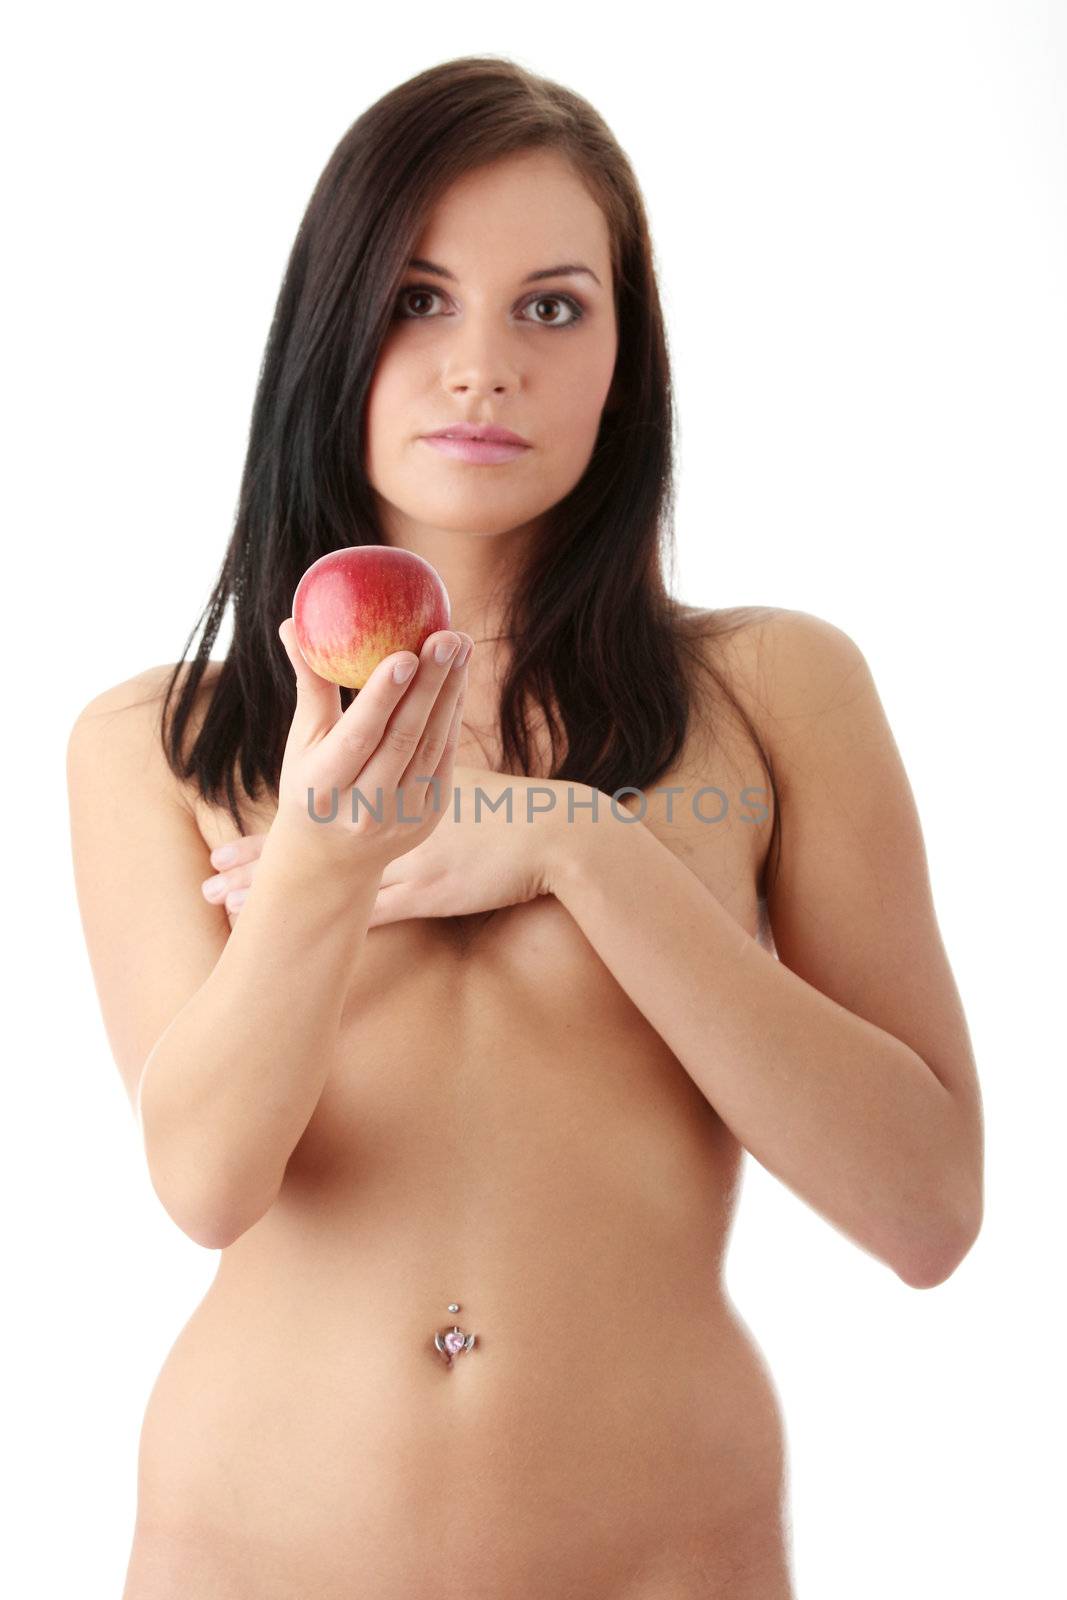 Nude young woman with a red juicy apple, isolated on white background - focused on apple